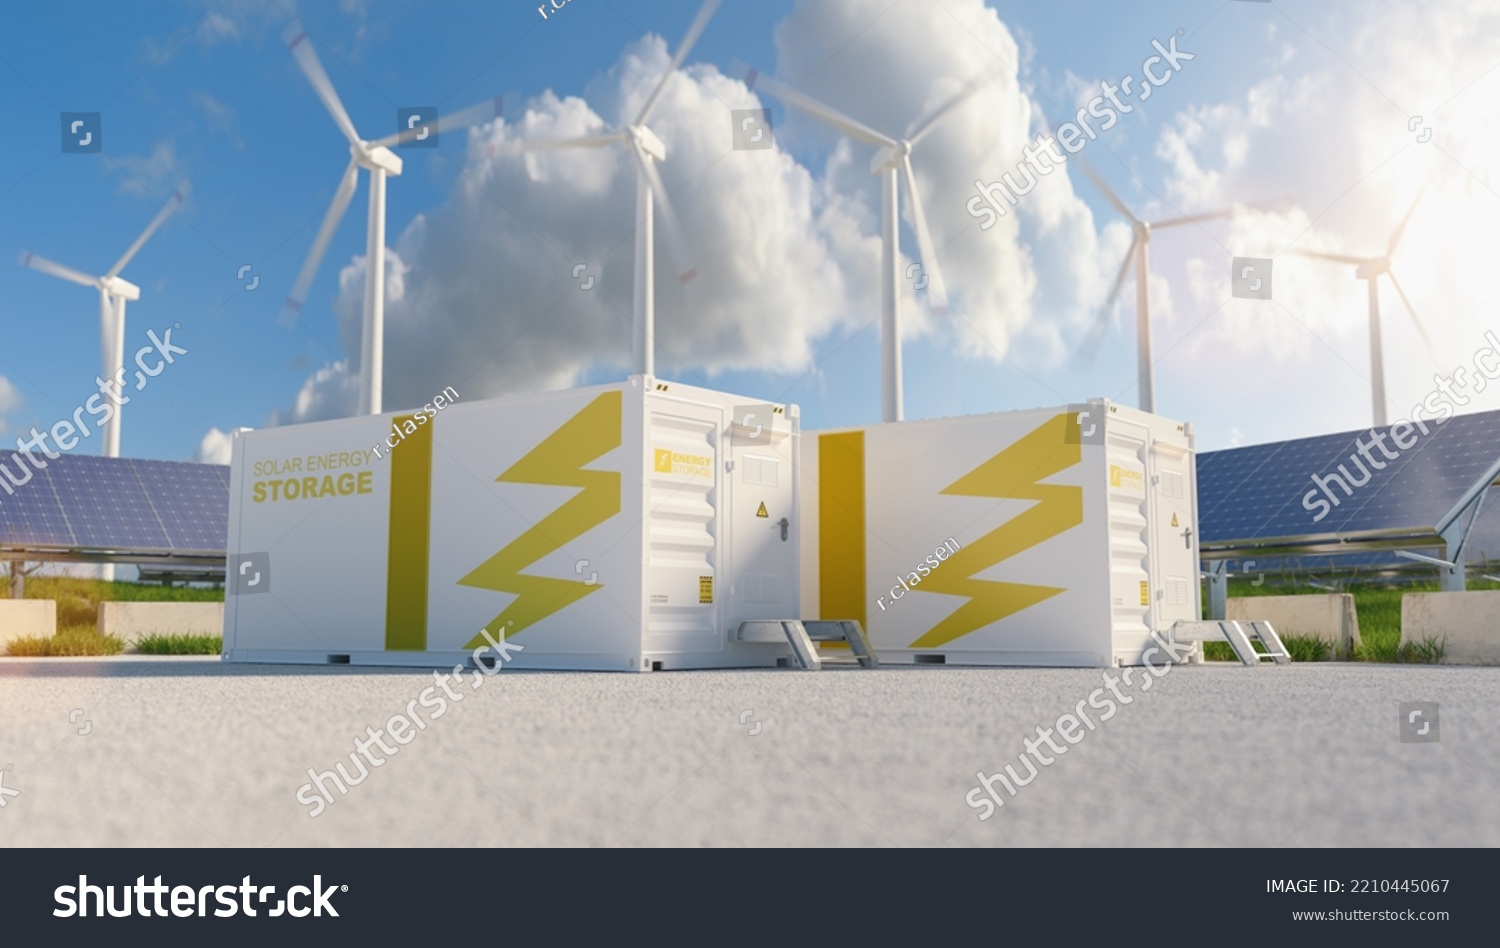 modern battery energy storage system with wind turbines and solar panel power plants in background. New energy concept image #2210445067